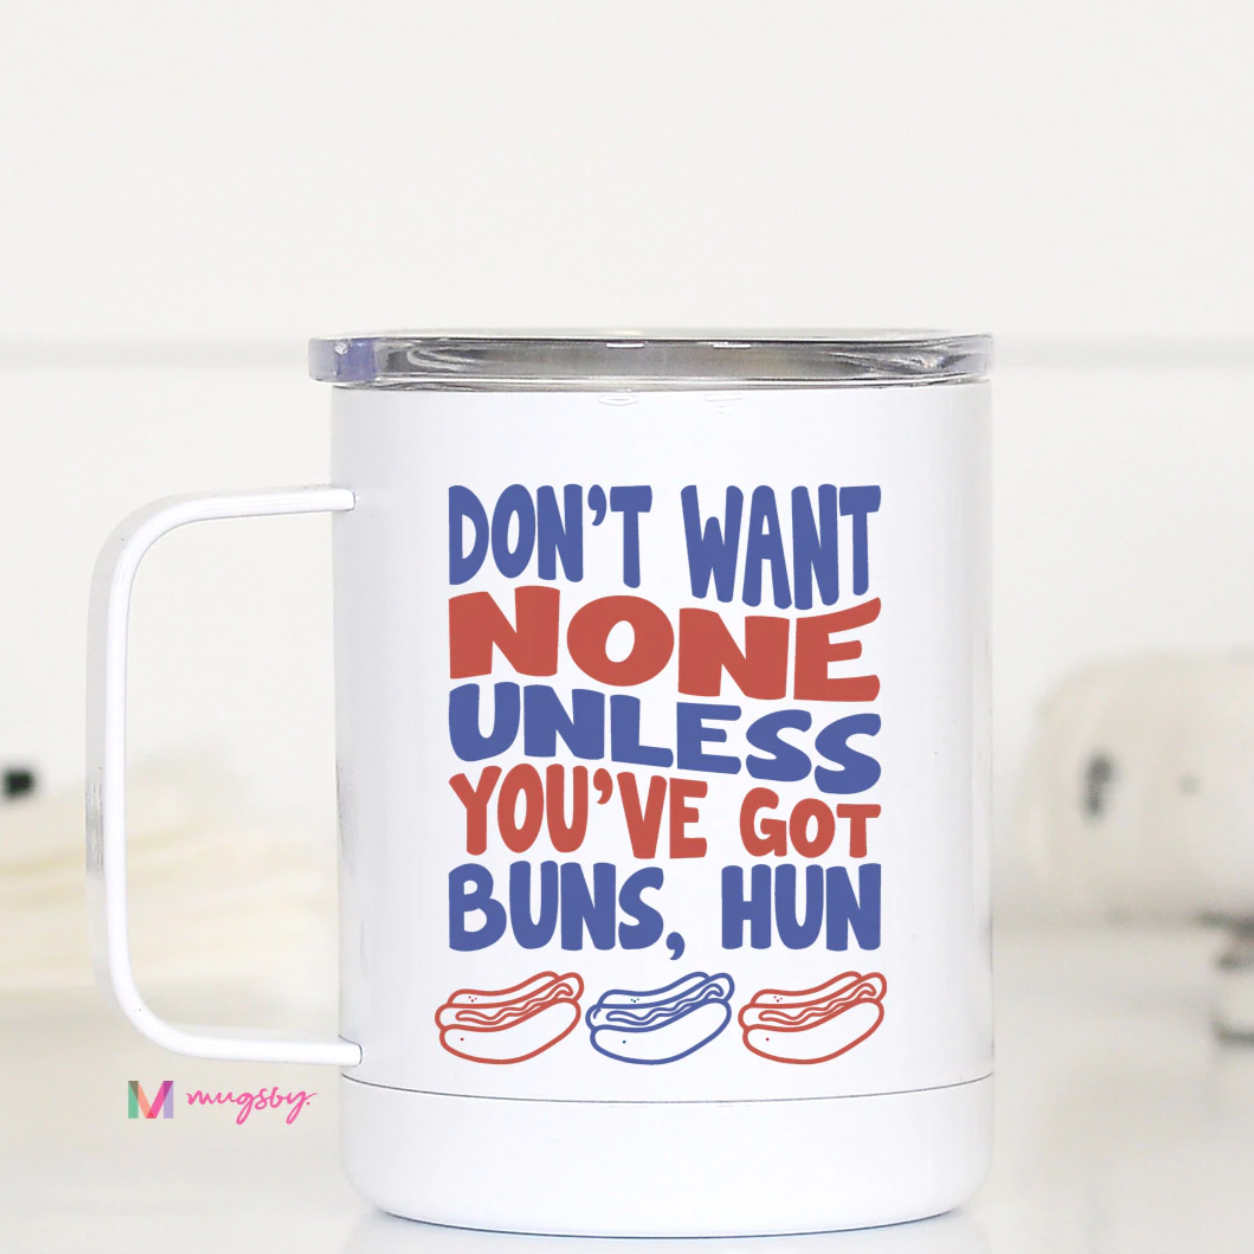 Don't Want None Unless You've Got Buns Hun Travel Cup With Handle - 12 oz